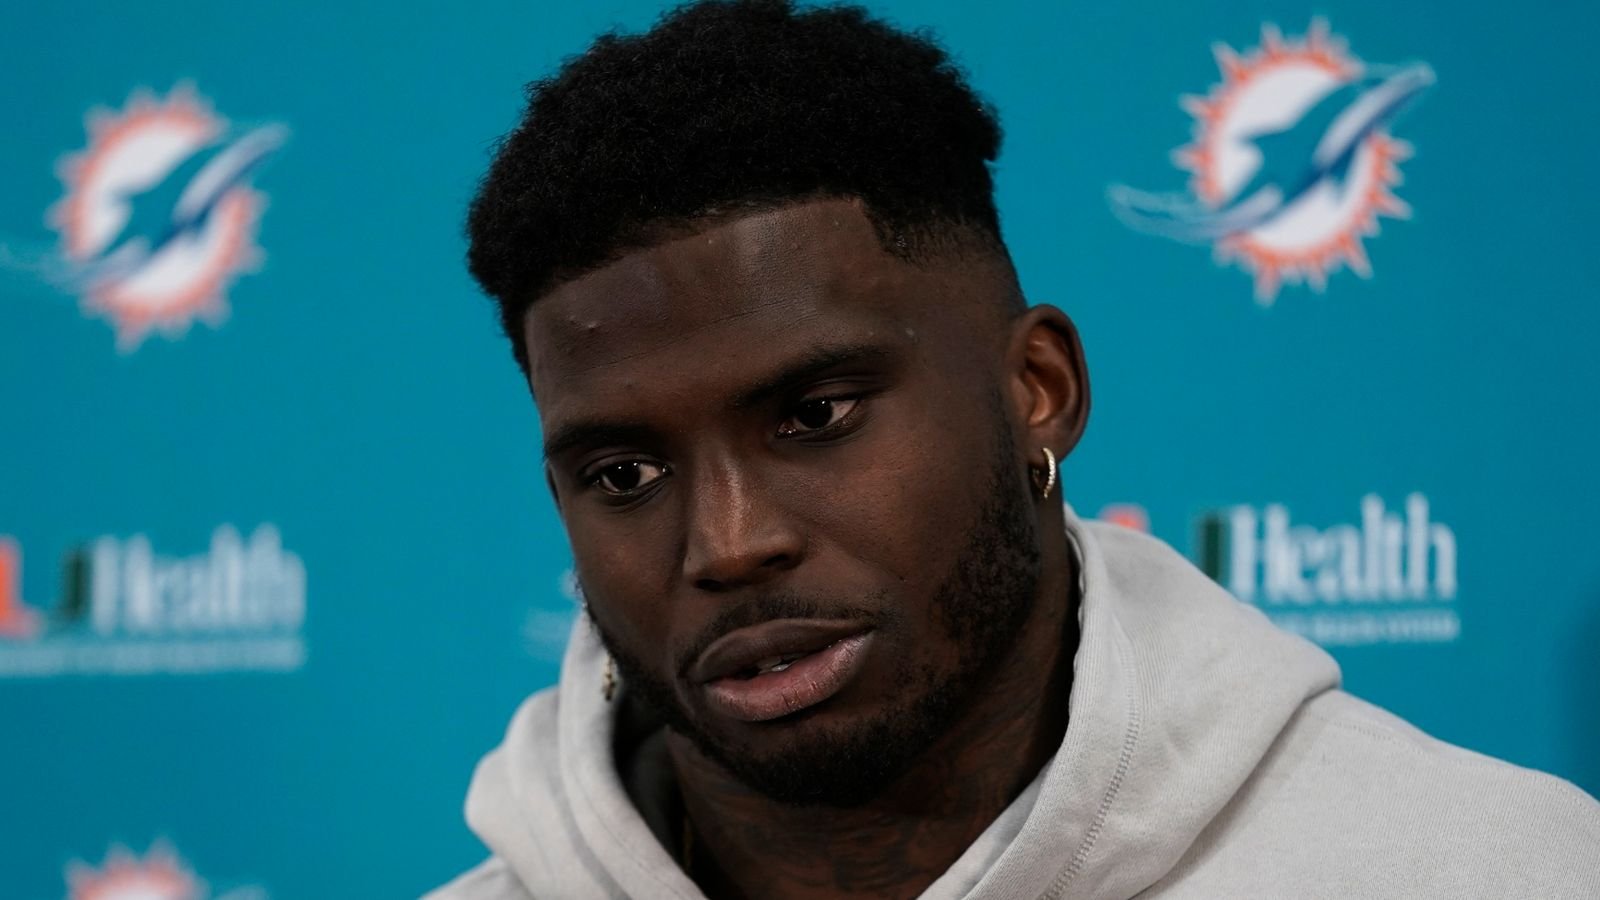 Tyreek Hill: Miami Dolphins wide receiver ‘safe’ after large fire at his South Florida home | NFL News